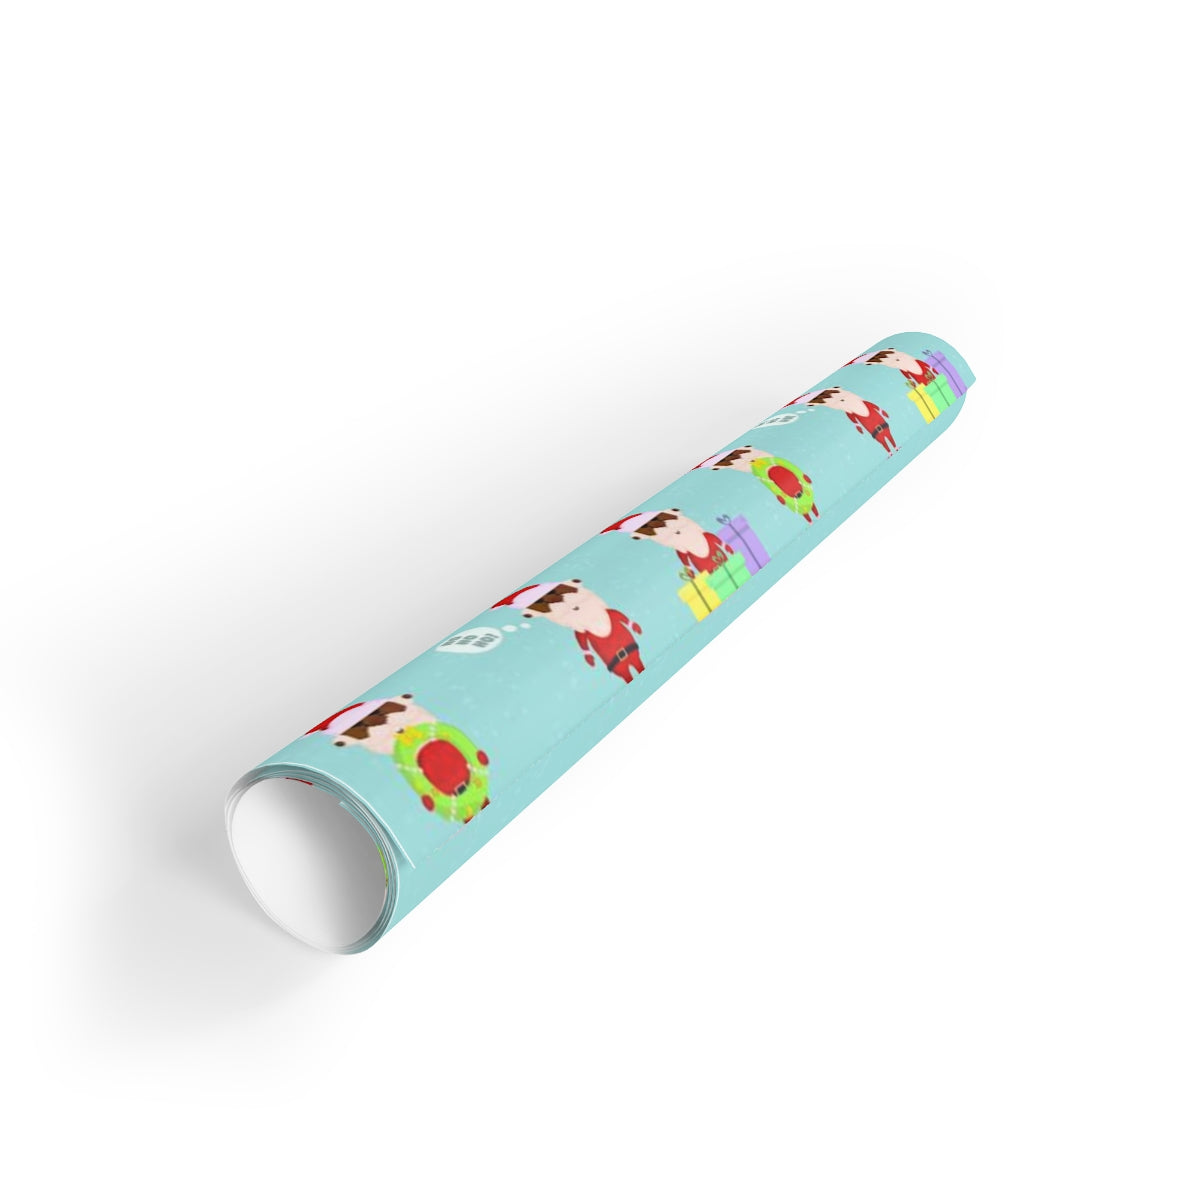 Black Santa Gift Wrapping Paper Rolls, 1pc